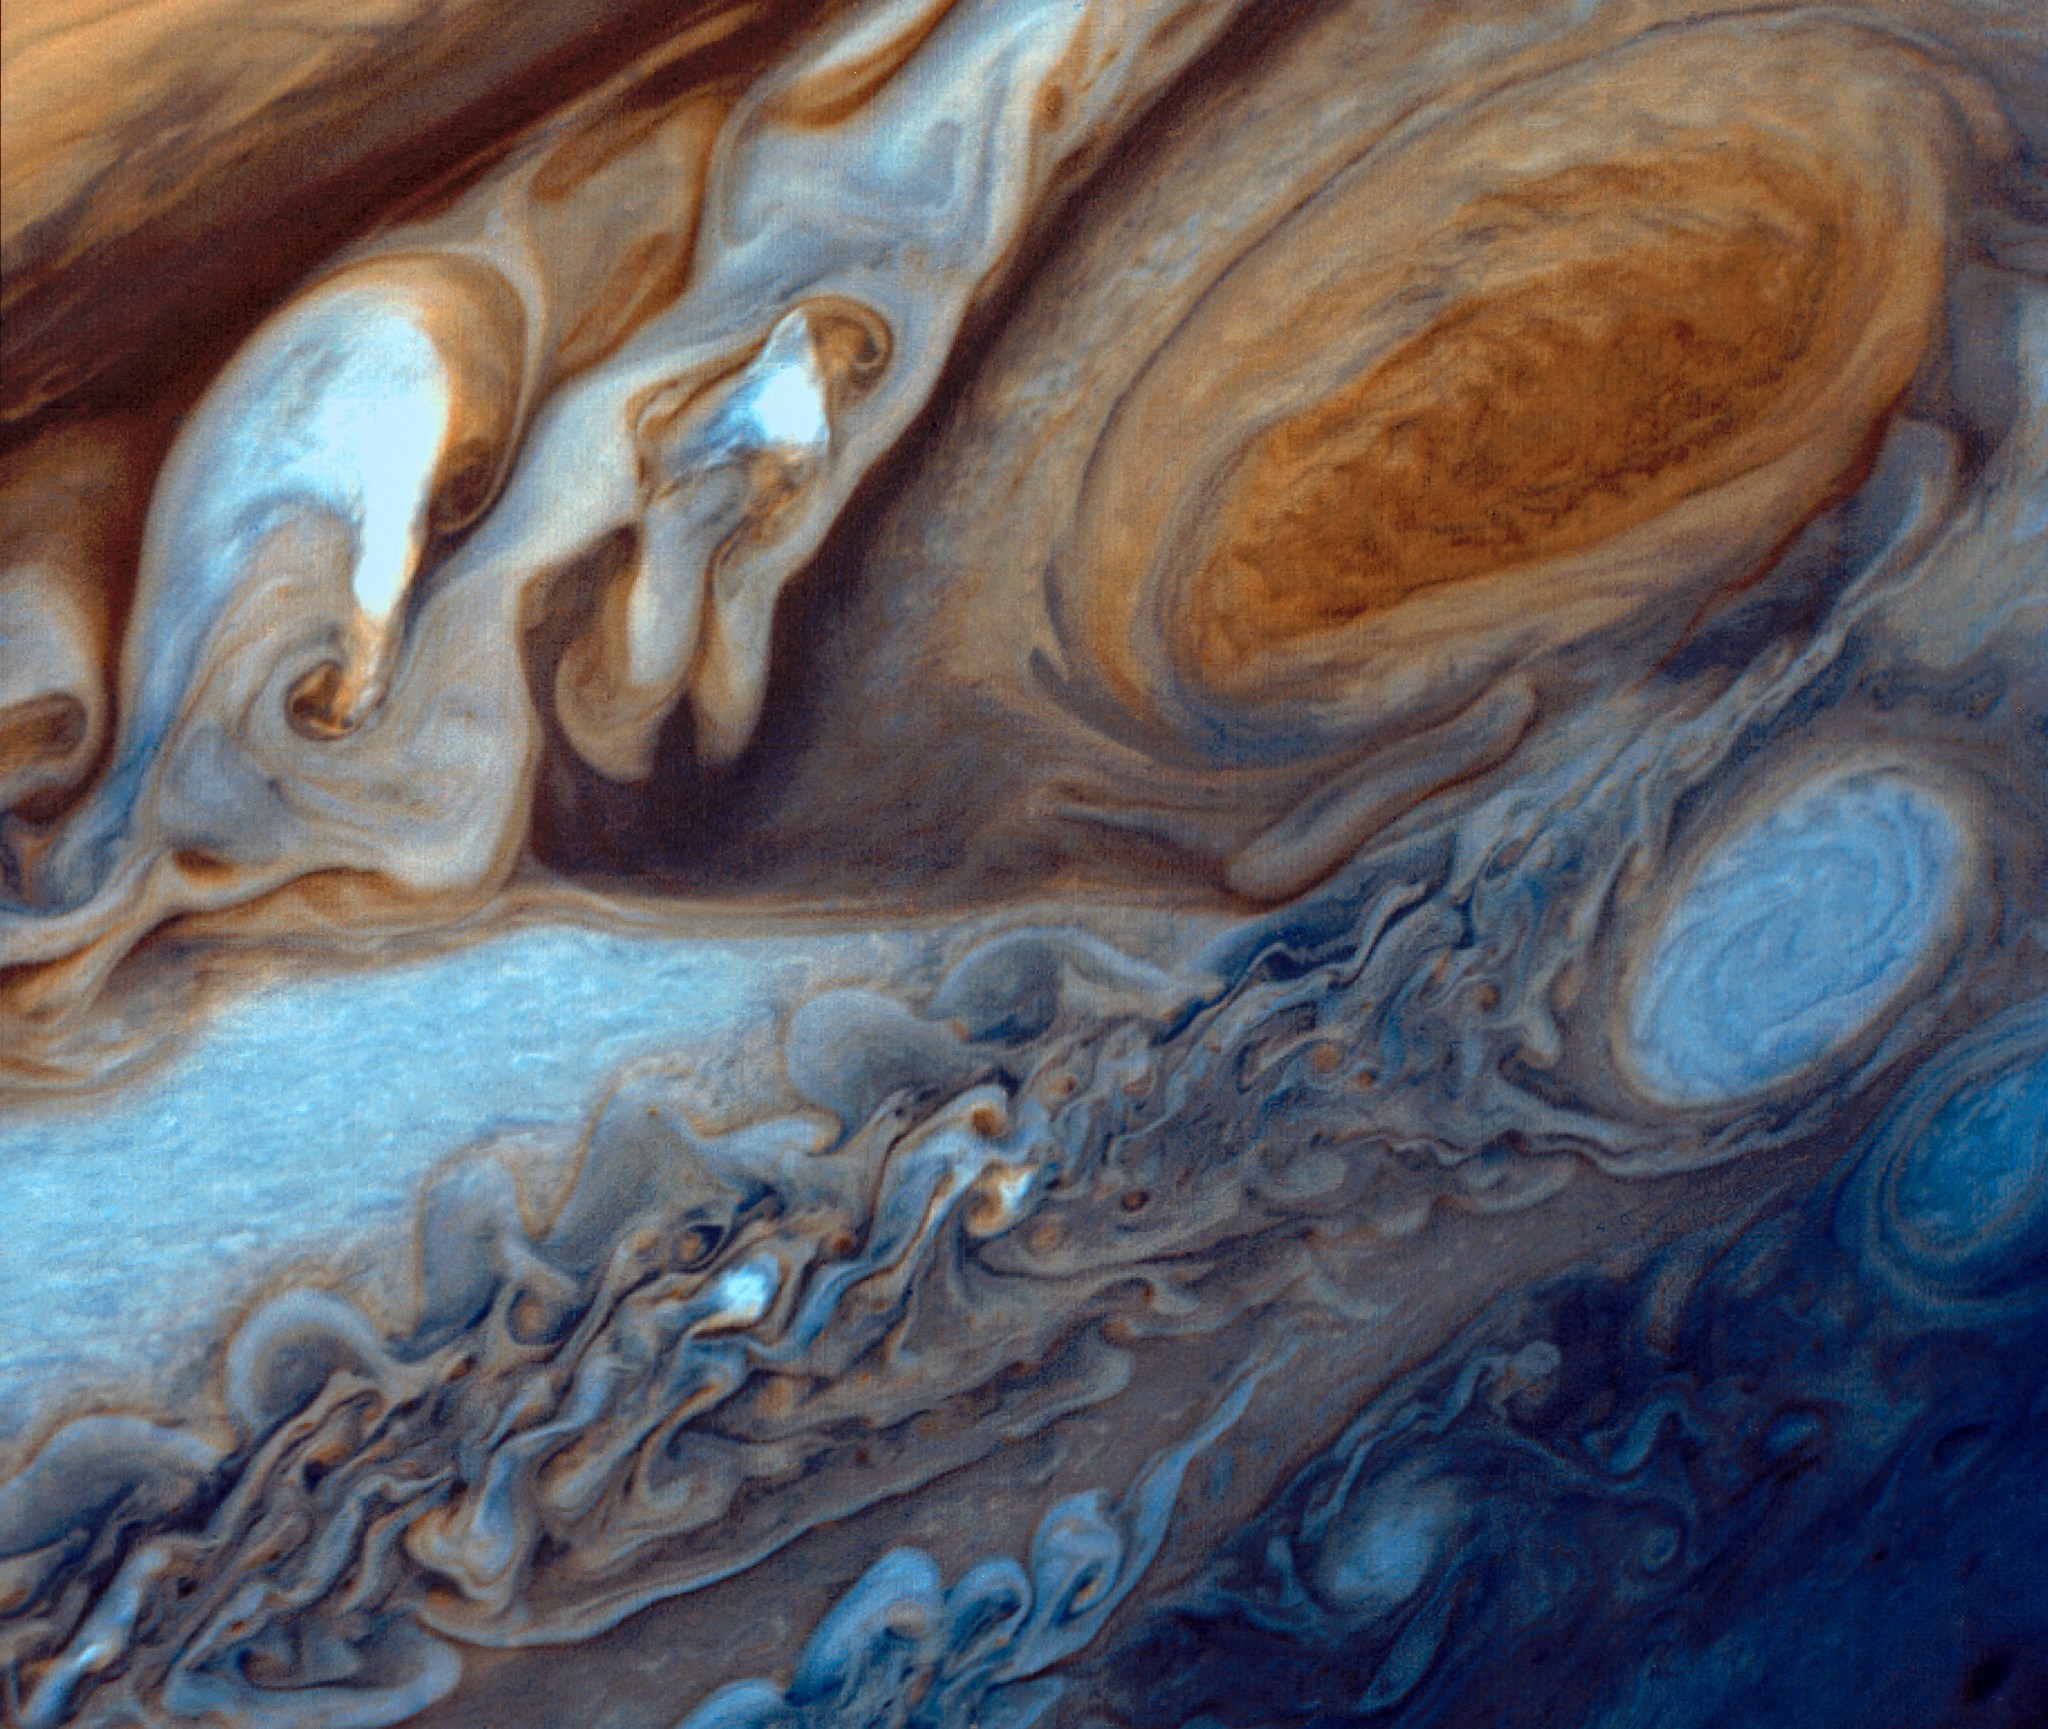 Jupiter's Great Red Spot is a swirl of orange-brown, lightening to pale orange at the outer edges. To its left are brown, white, and orange swirls; at bottom, blue and white swirls and ripples. The entire image has the effect of dyes dripped into water.